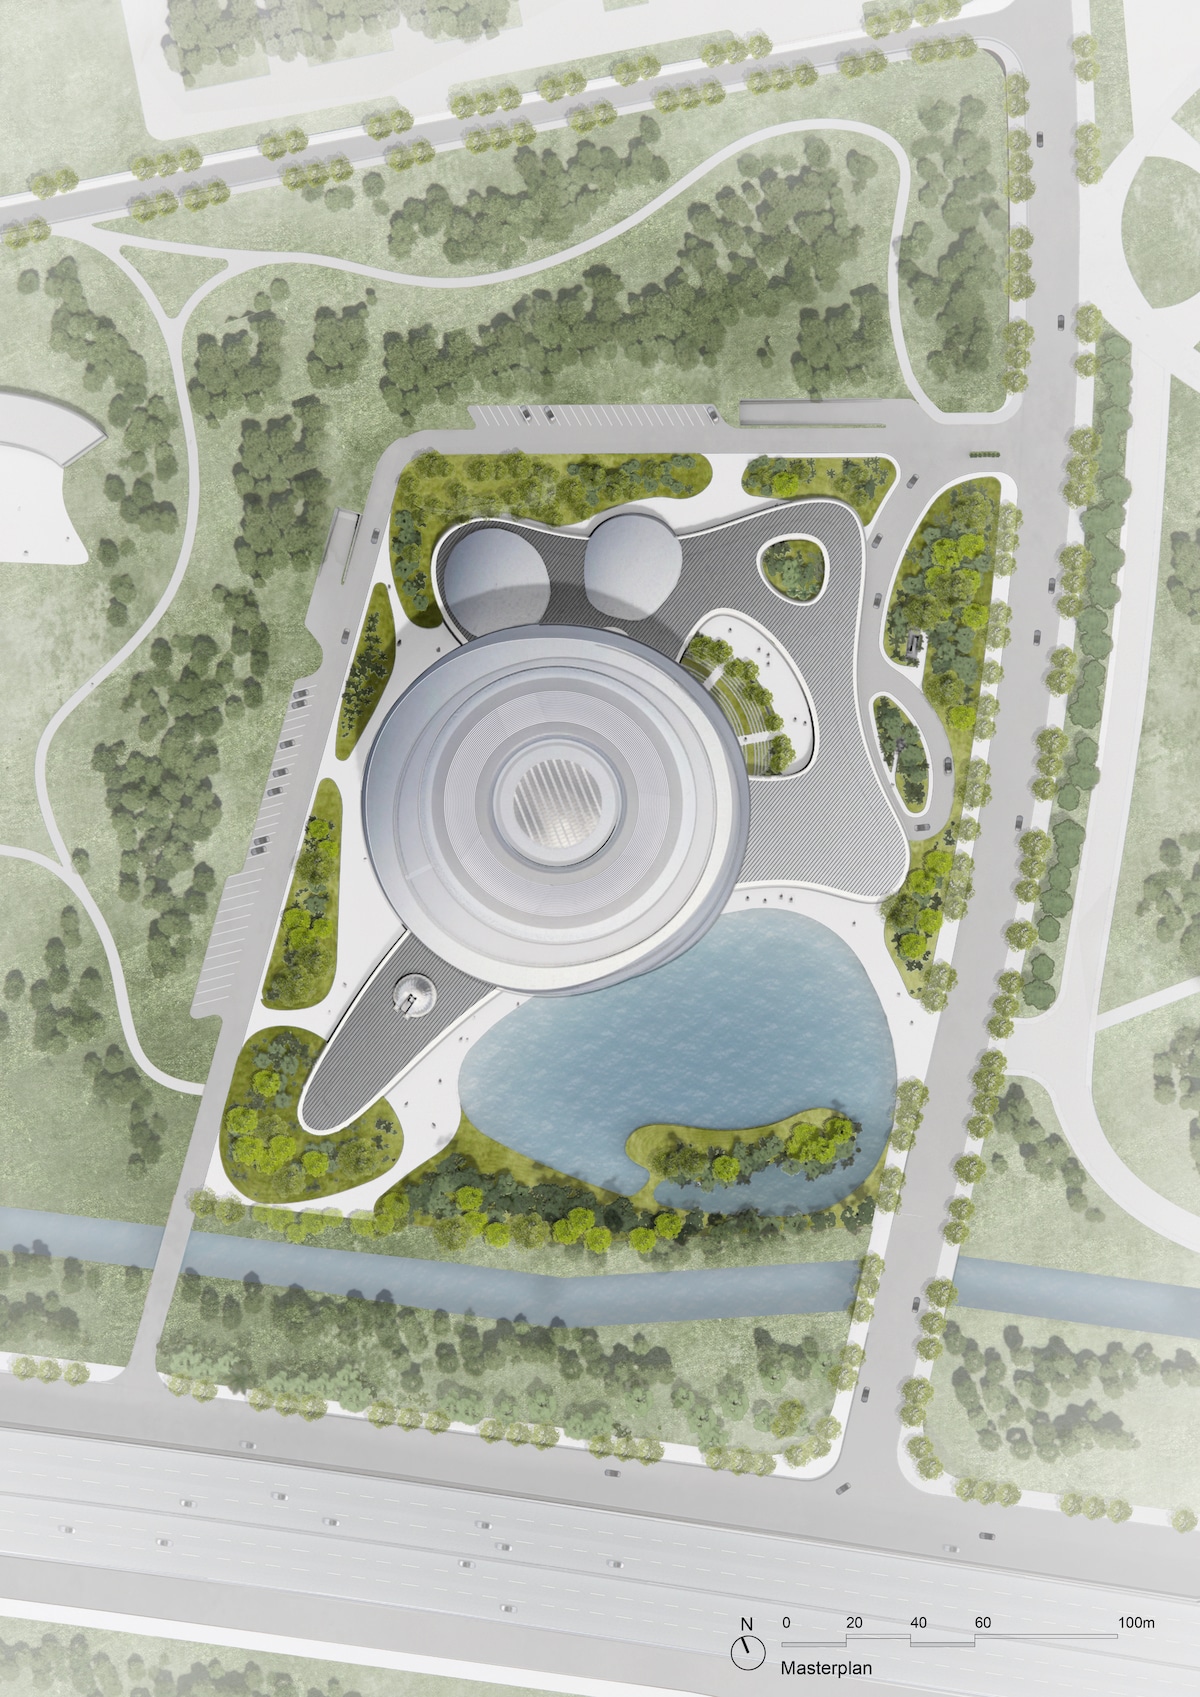 Urban Plan for Hainan Science and Technology Museum